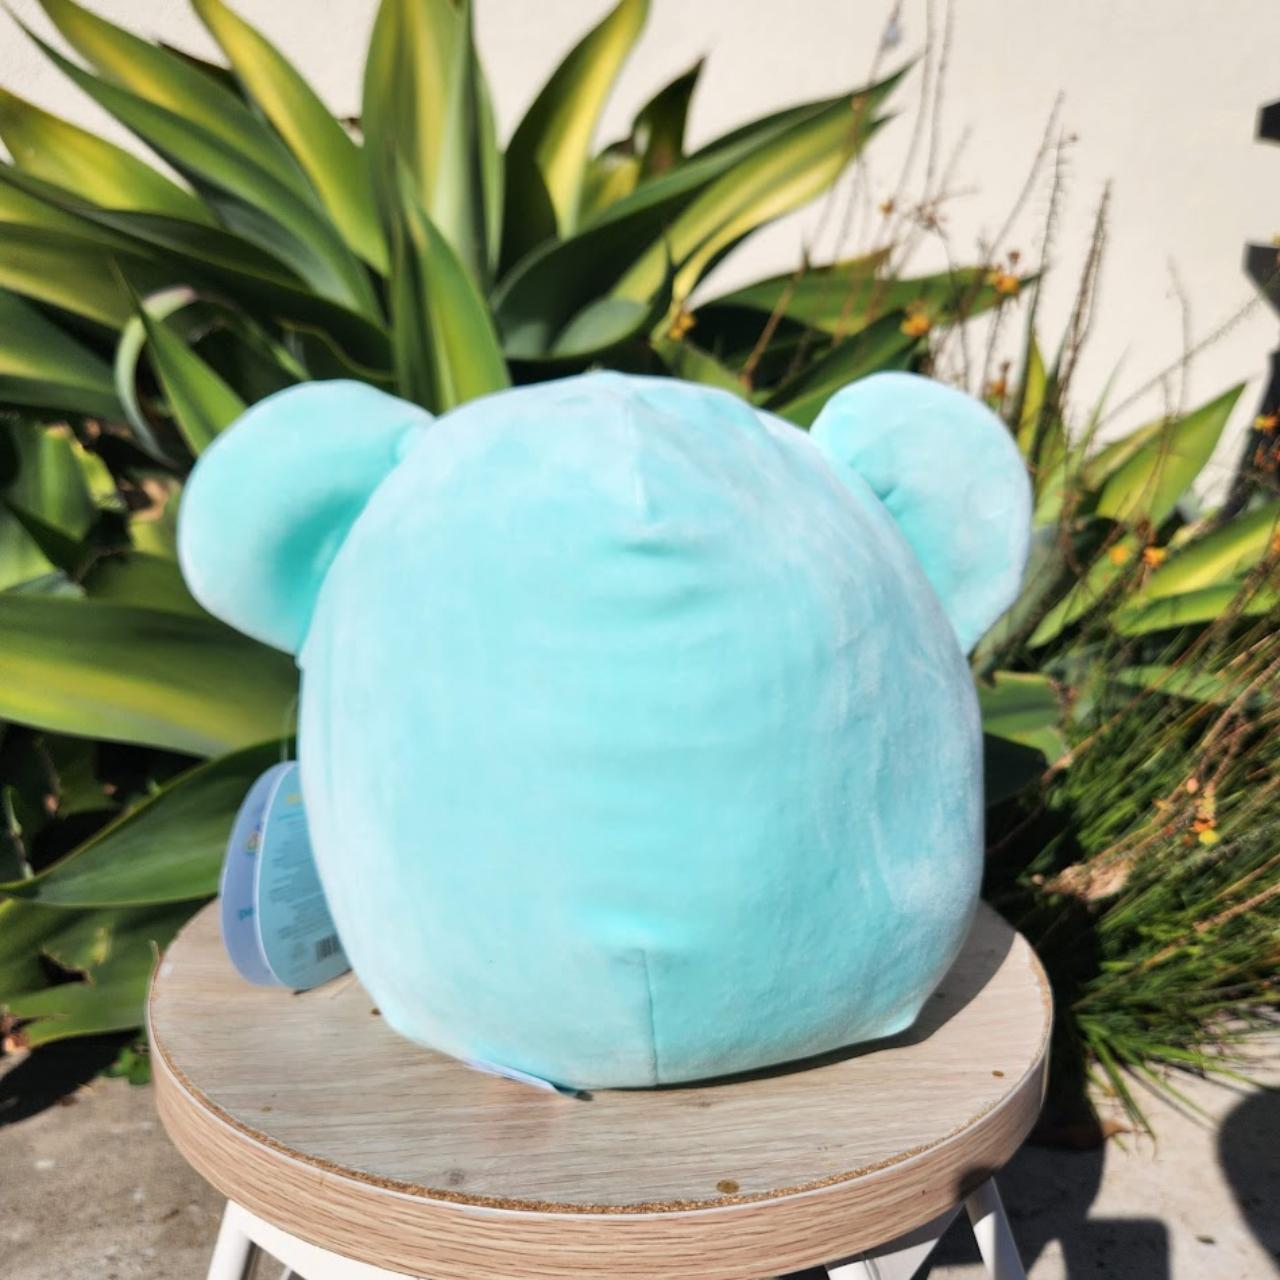 Squishmallows Official Plush 10 inch Coco the Mint Green Koala